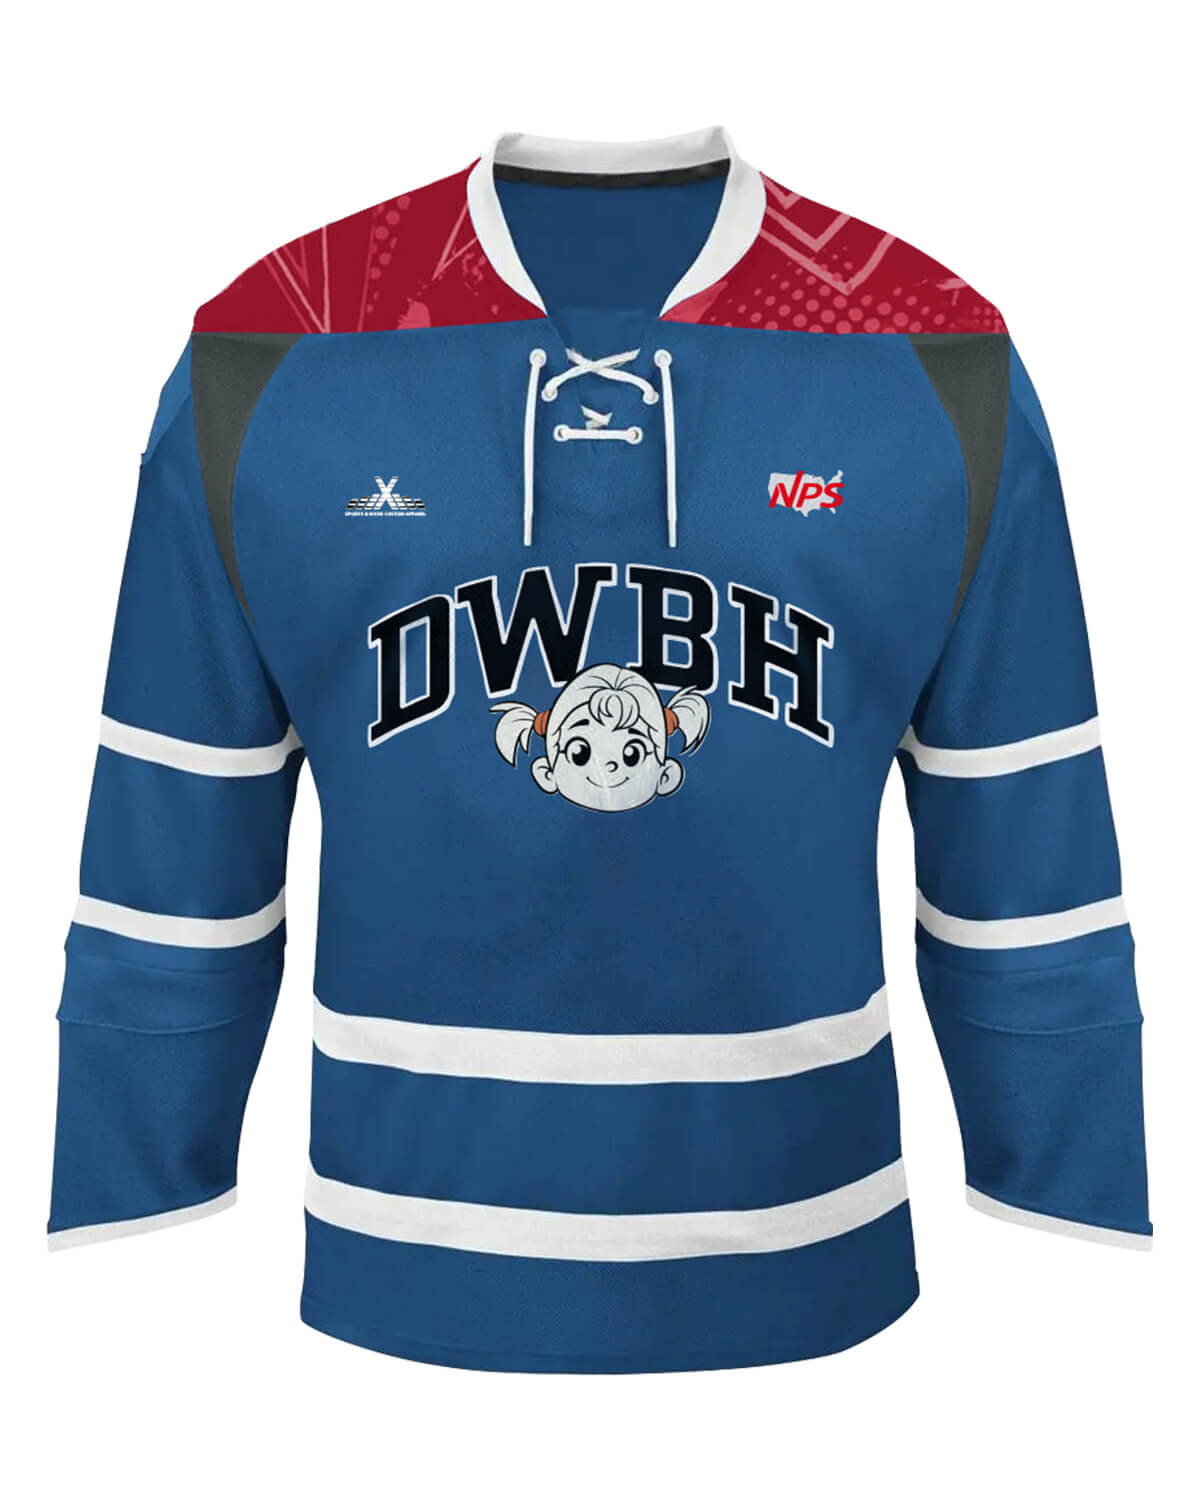 Custom Ice Hockey Softball Jersey Print Your Name Number Team Sports Competition Training Clothing